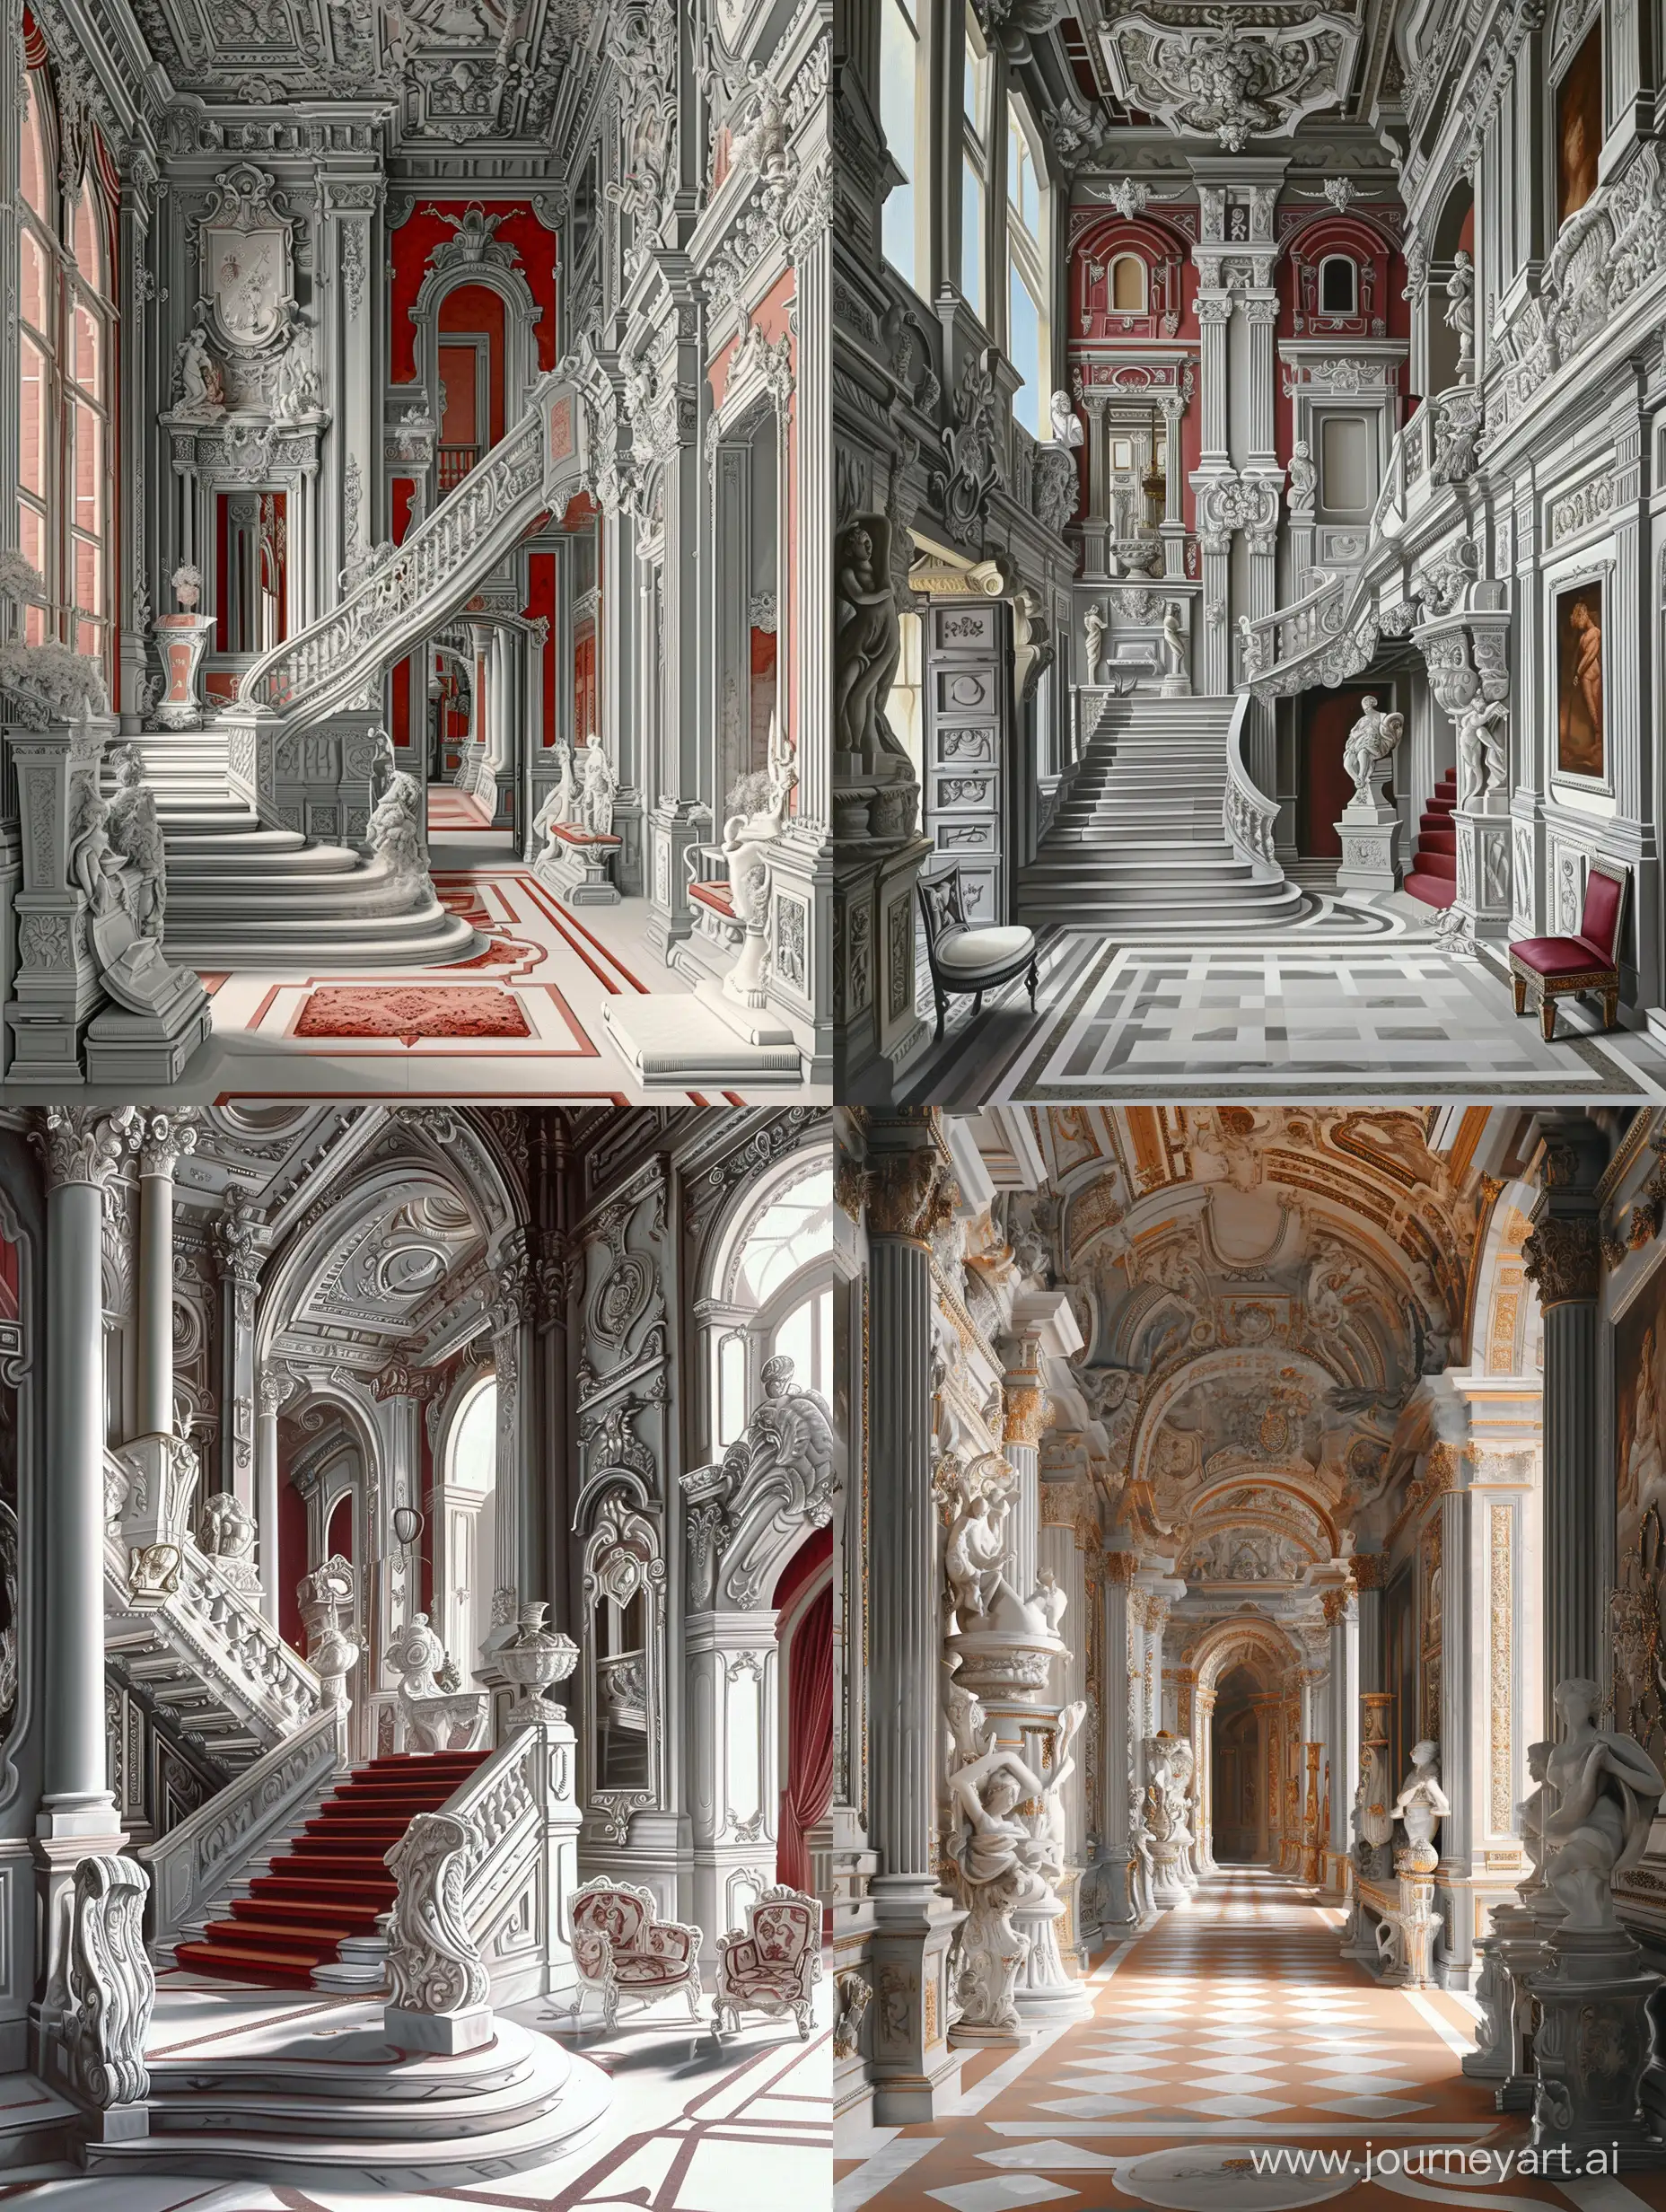 a highly detailed, ultrarealistic painting depicting an ornate palace interior furnished, in the style of pieter de hooch, Andrea Pozzo, grey, white and light crimson, baroque-inspired sculptures, richly colored, die brücke, jan van eyck.